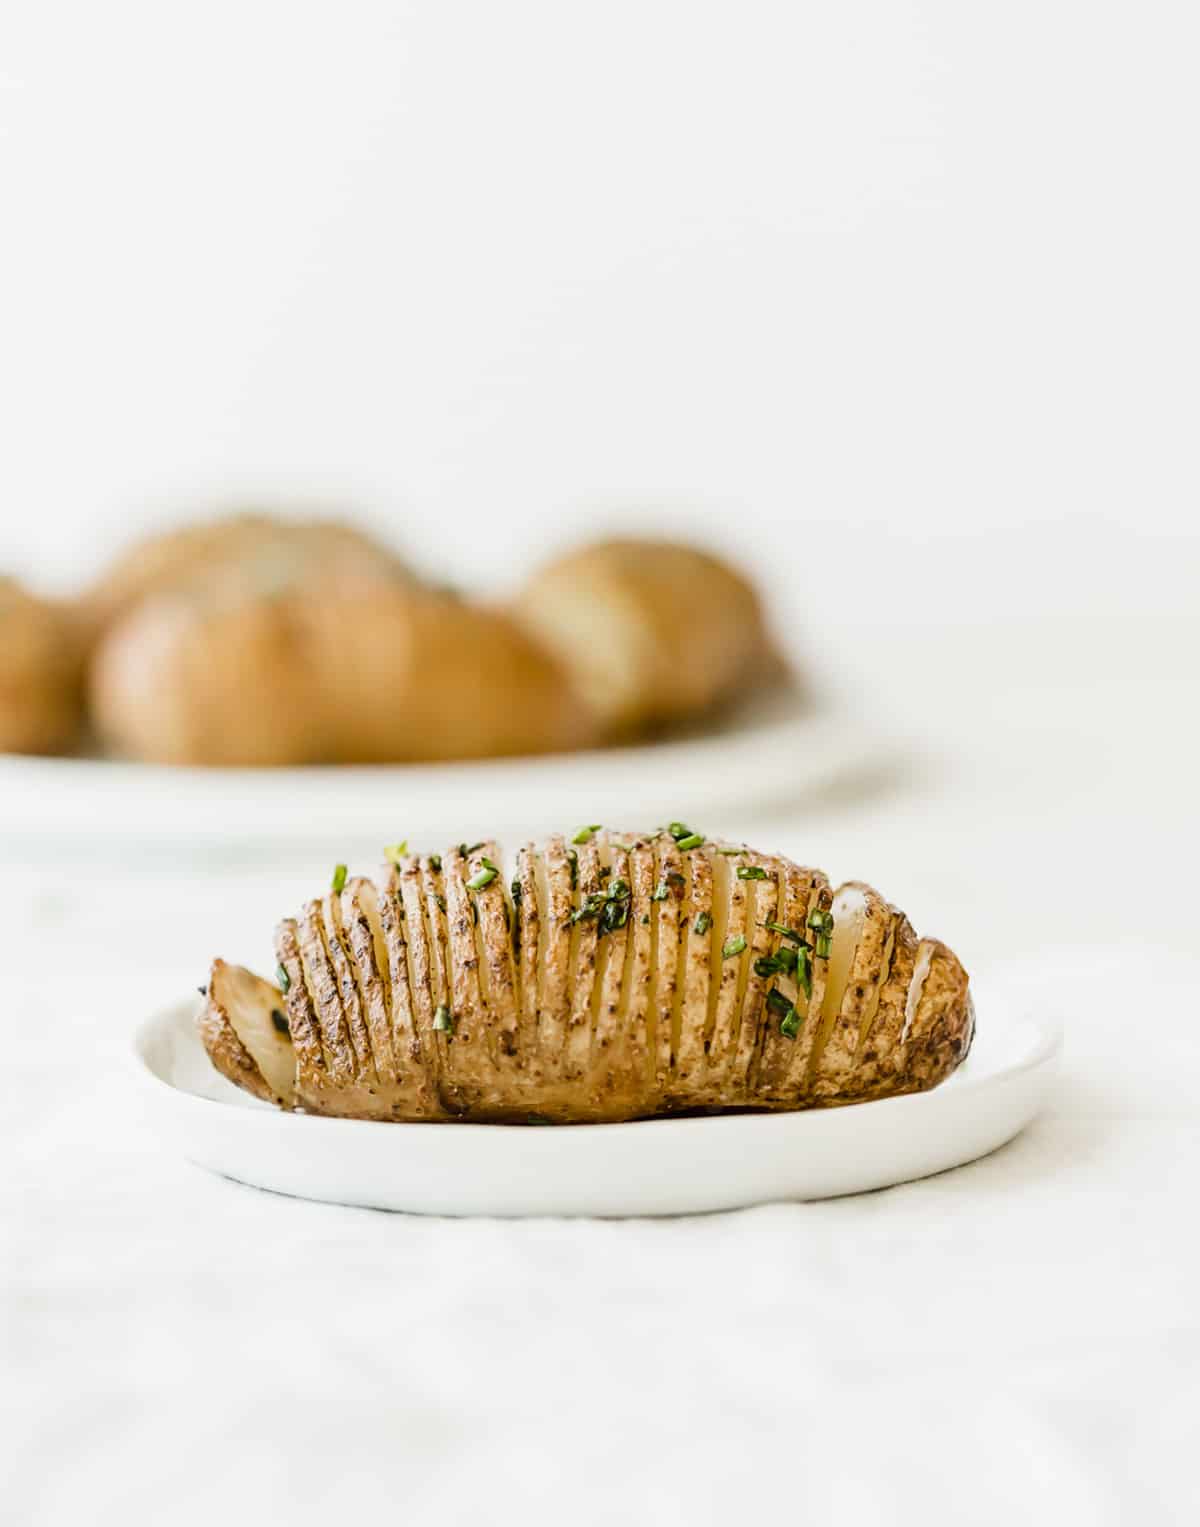 A Hasselback Potatoe on a white plate against a white background.